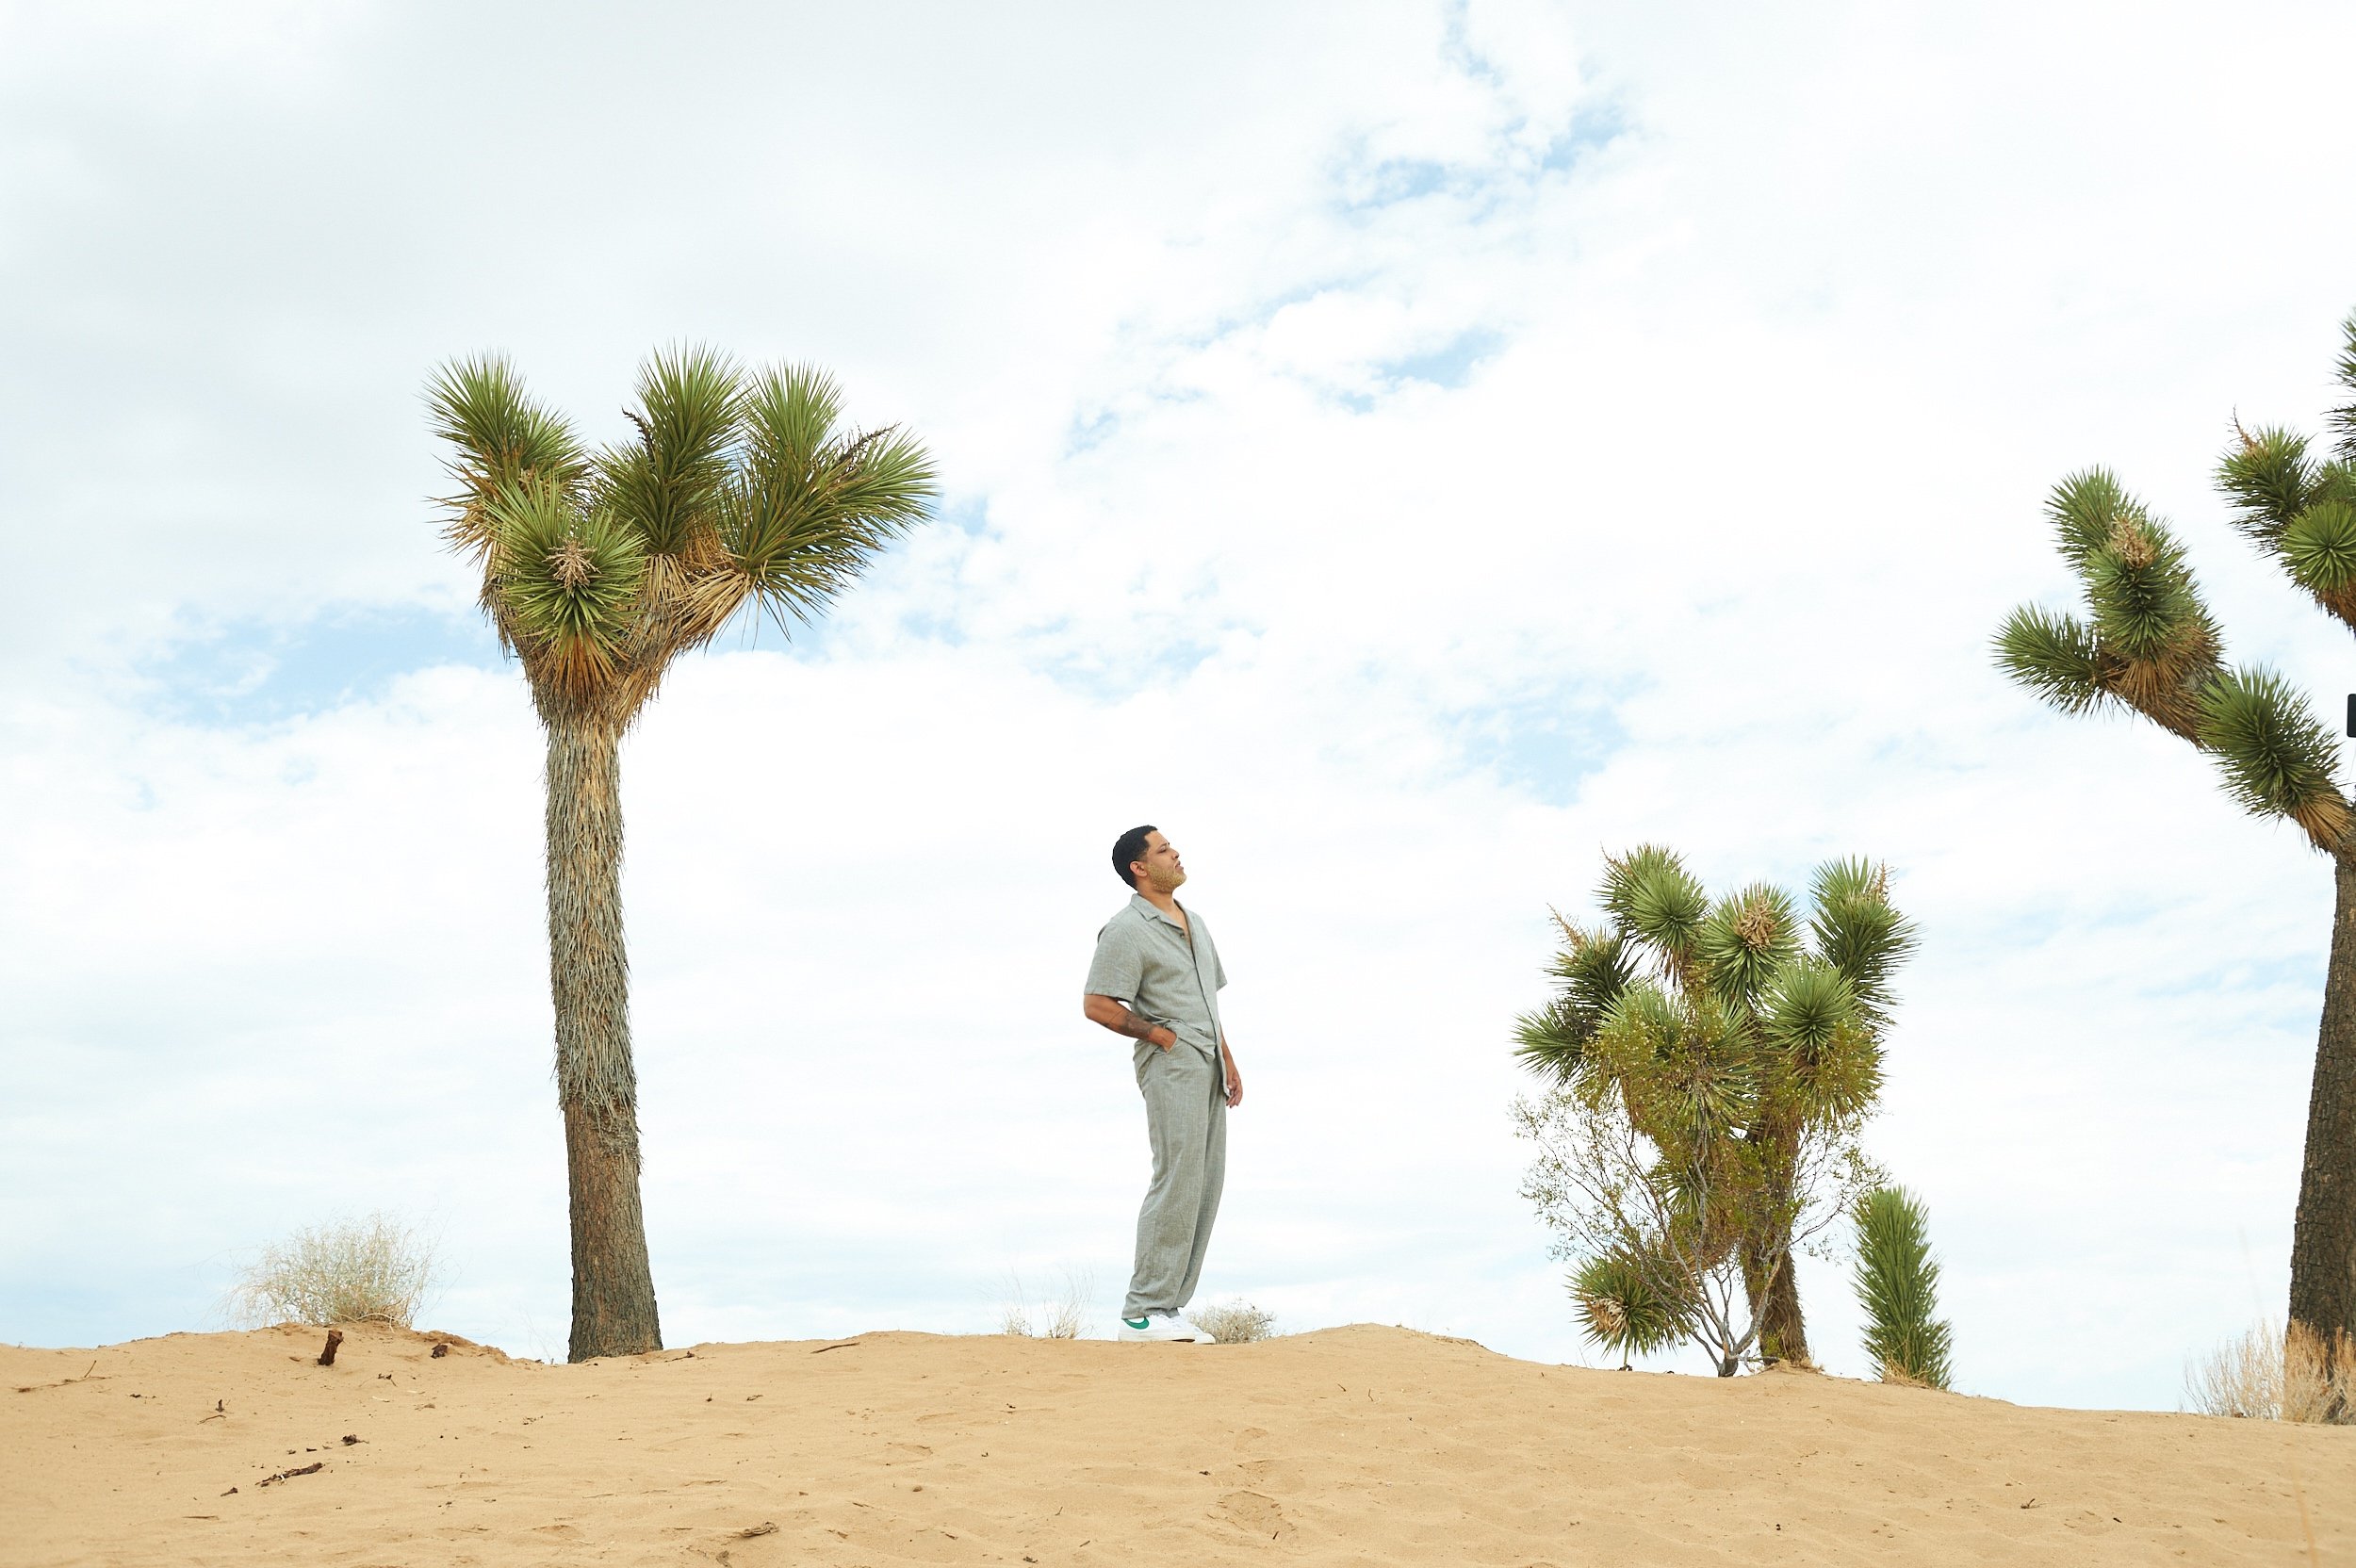 Singer-songwriter Alexander Nate stands in the middle of a desert